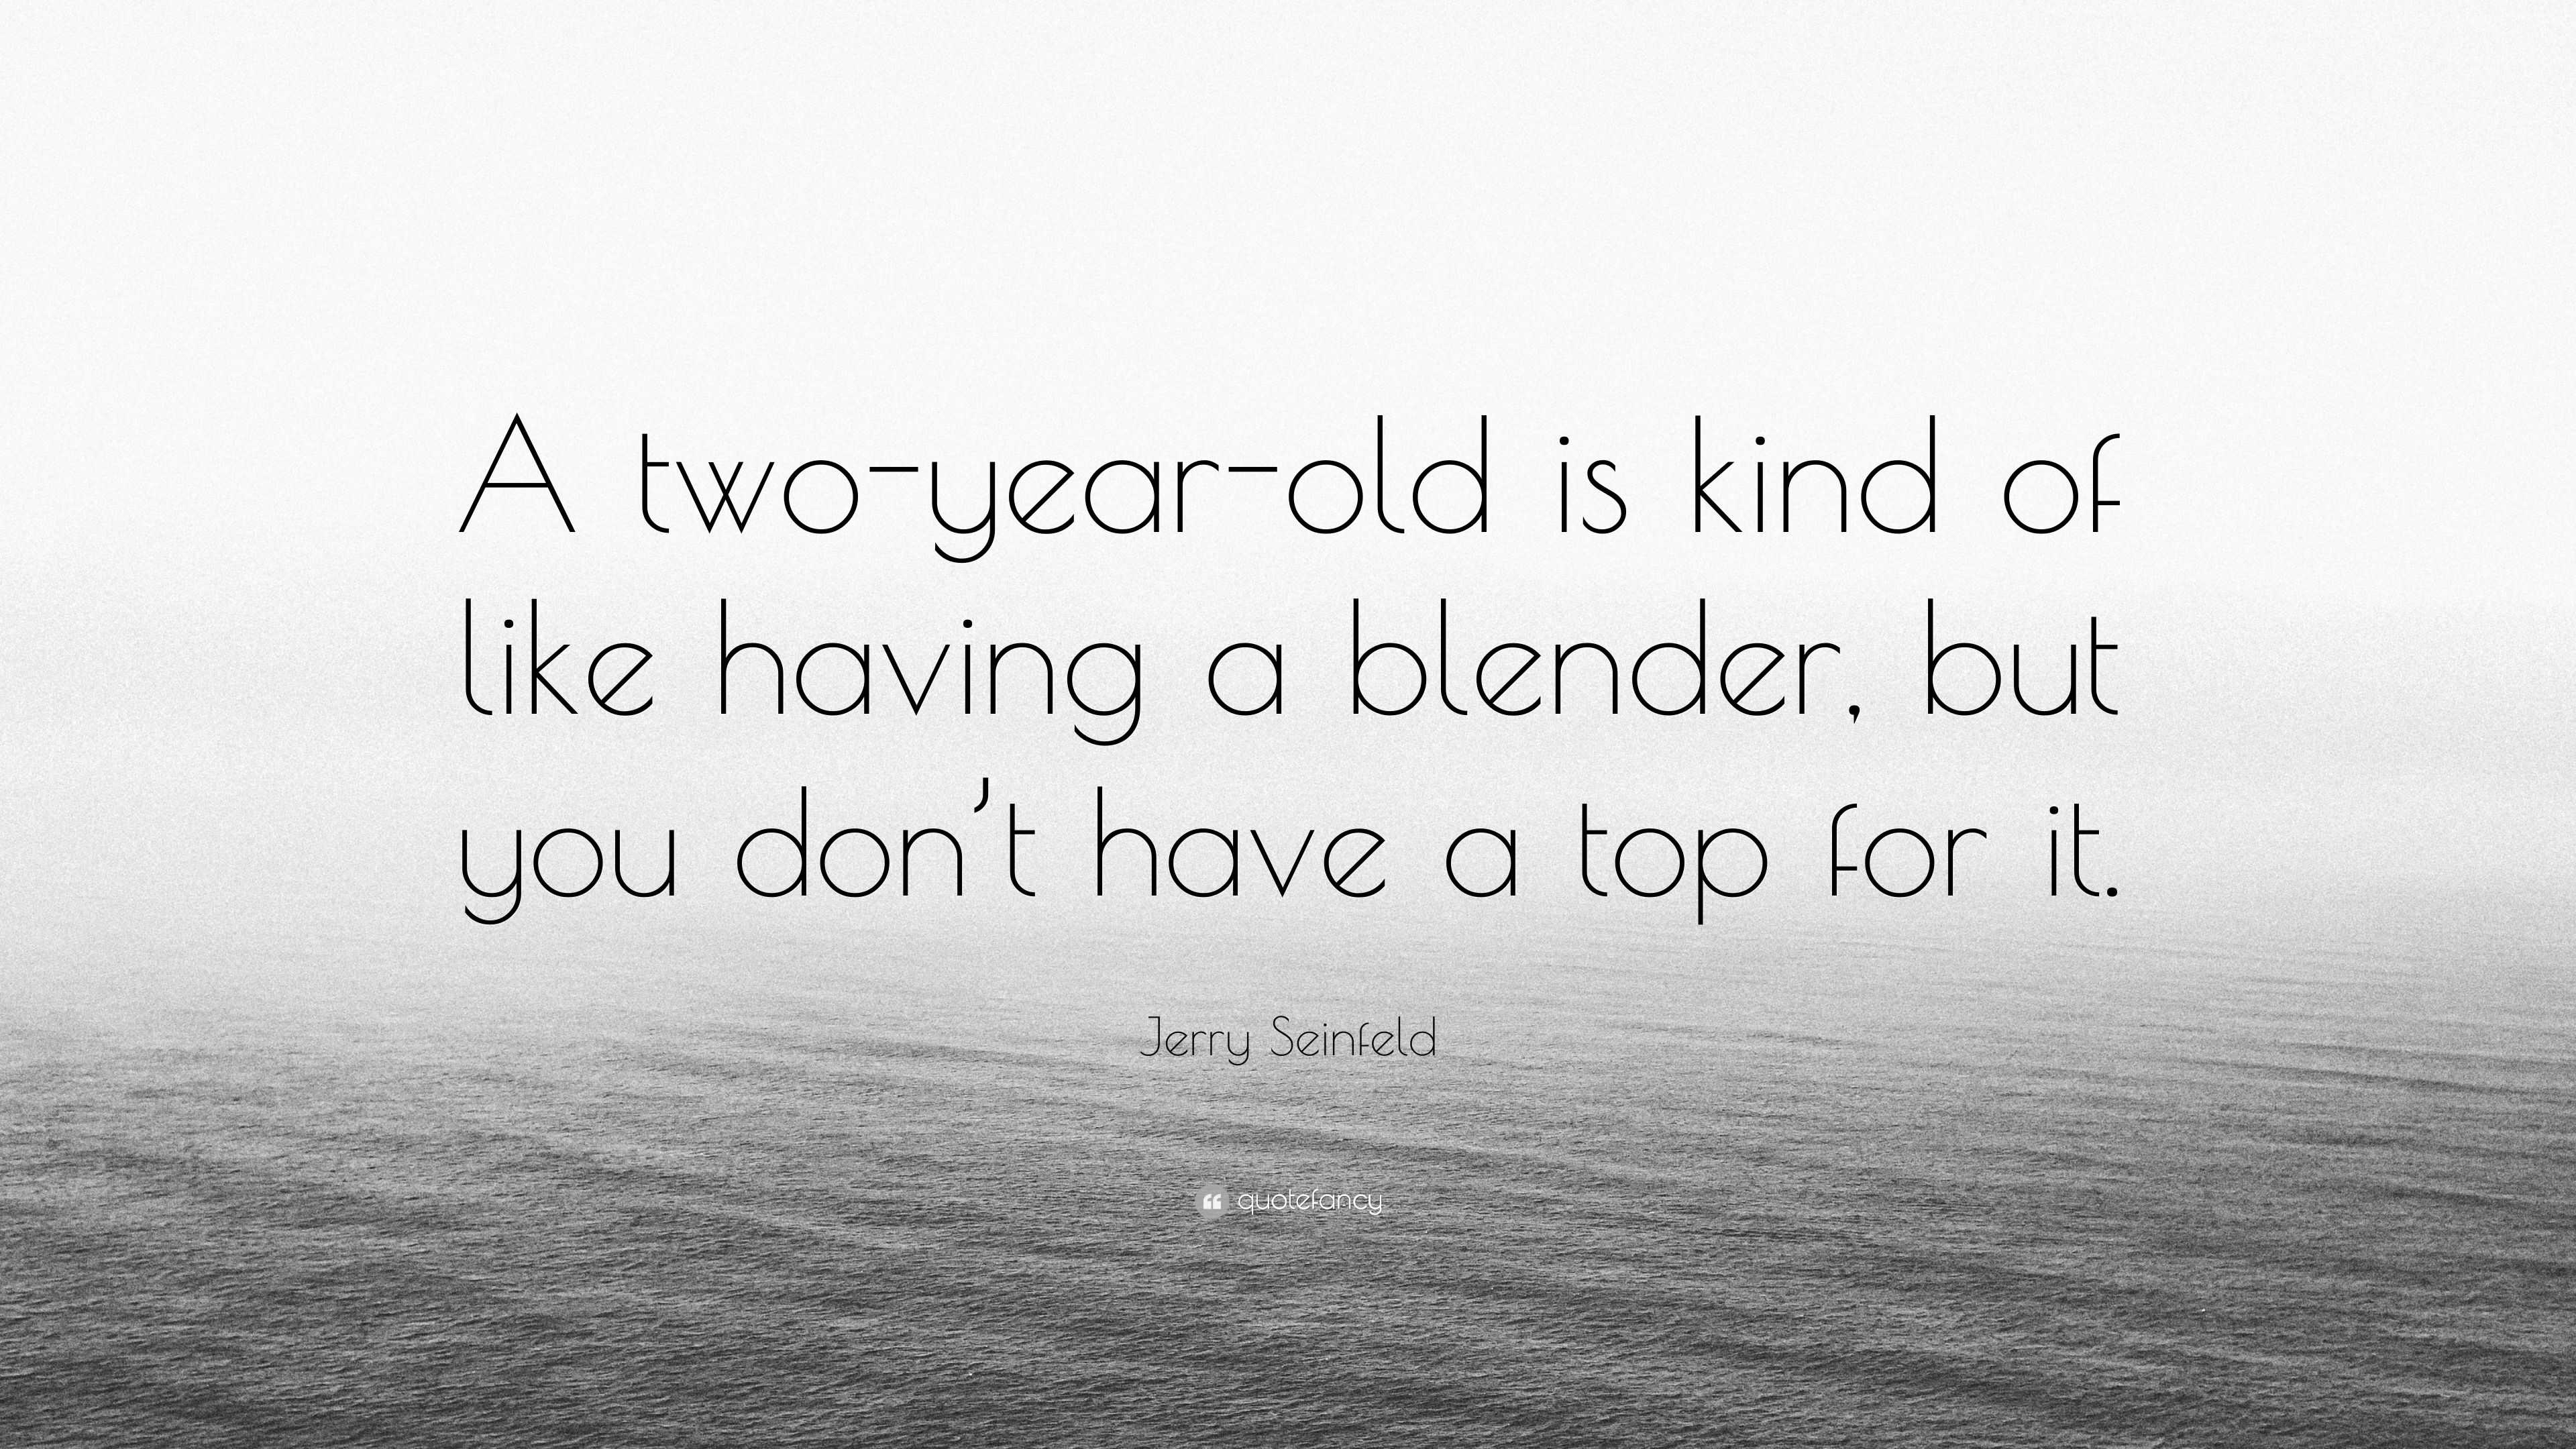 Having a two-year-old is like having a blender that you d…